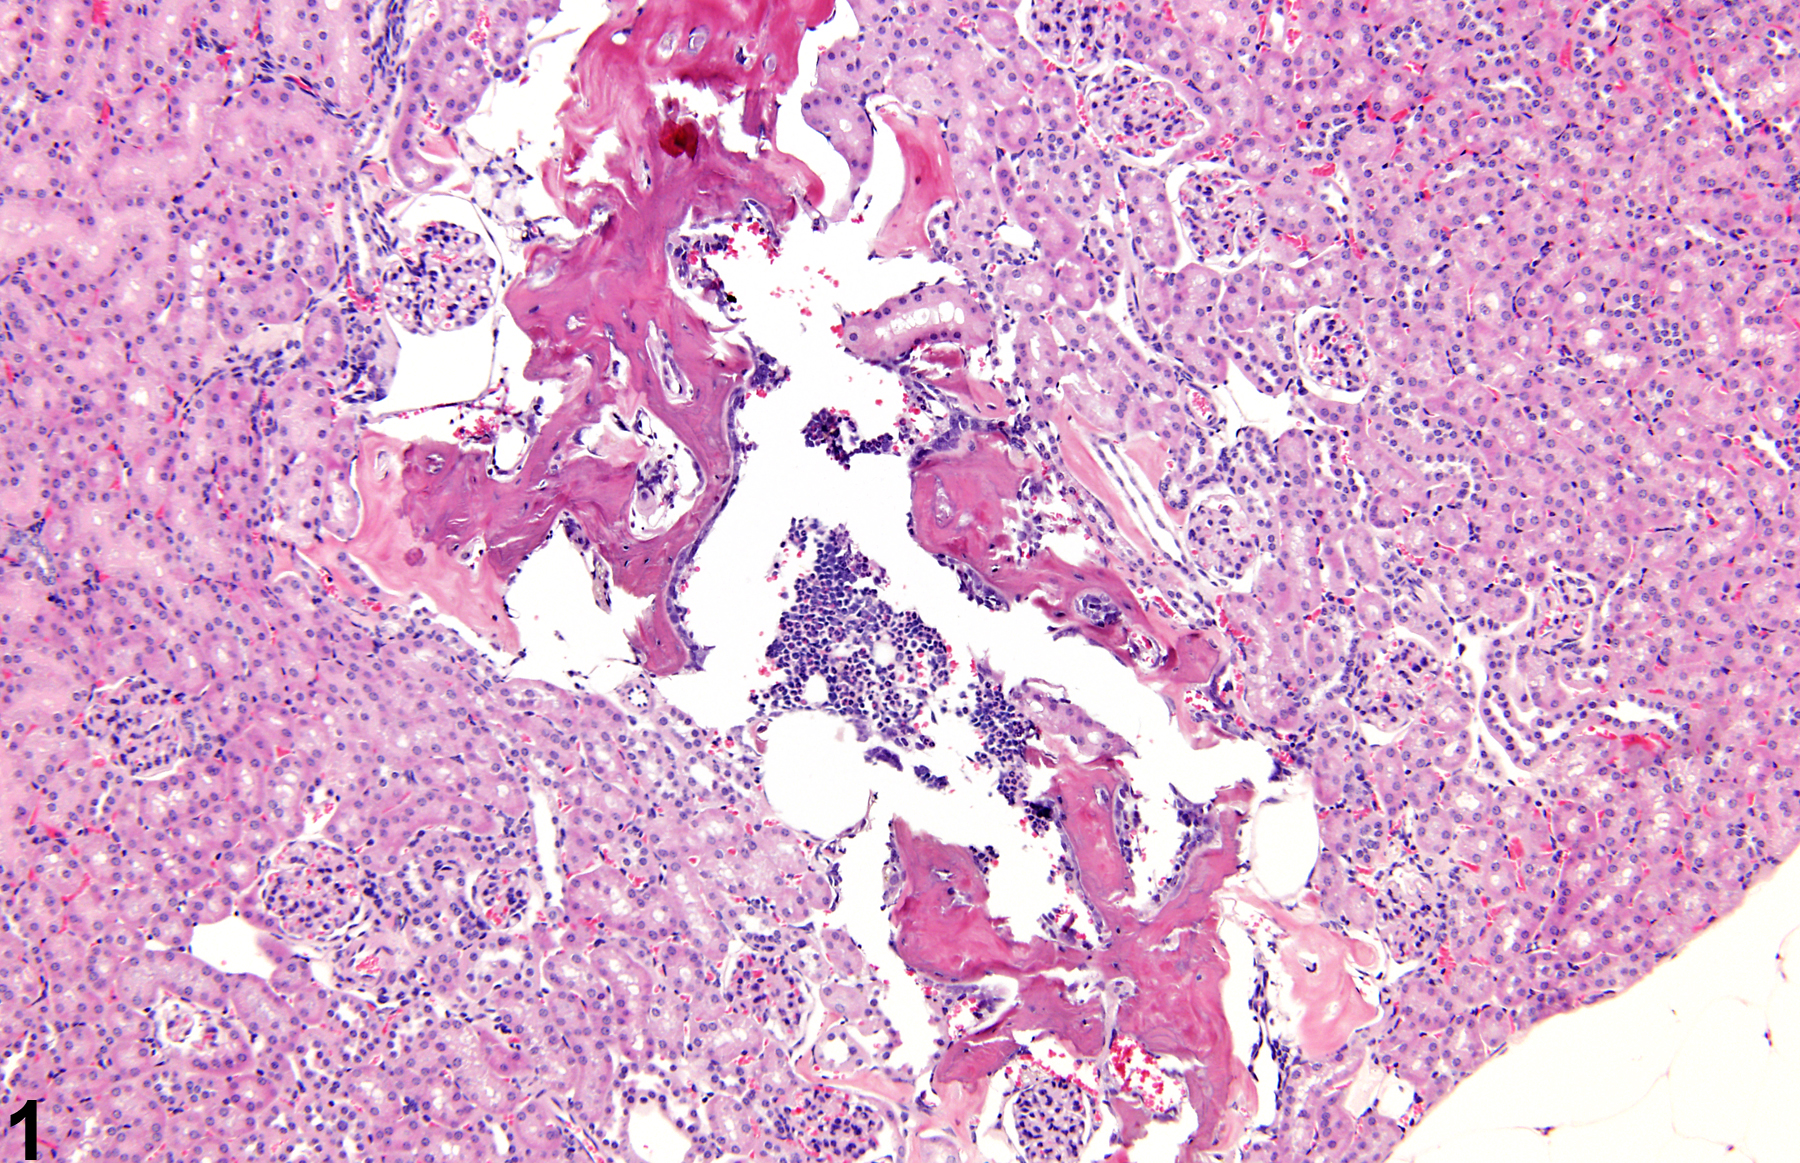 Image of metaplasia, osseous in the kidney from a female B6C3F1 mouse in a chronic study